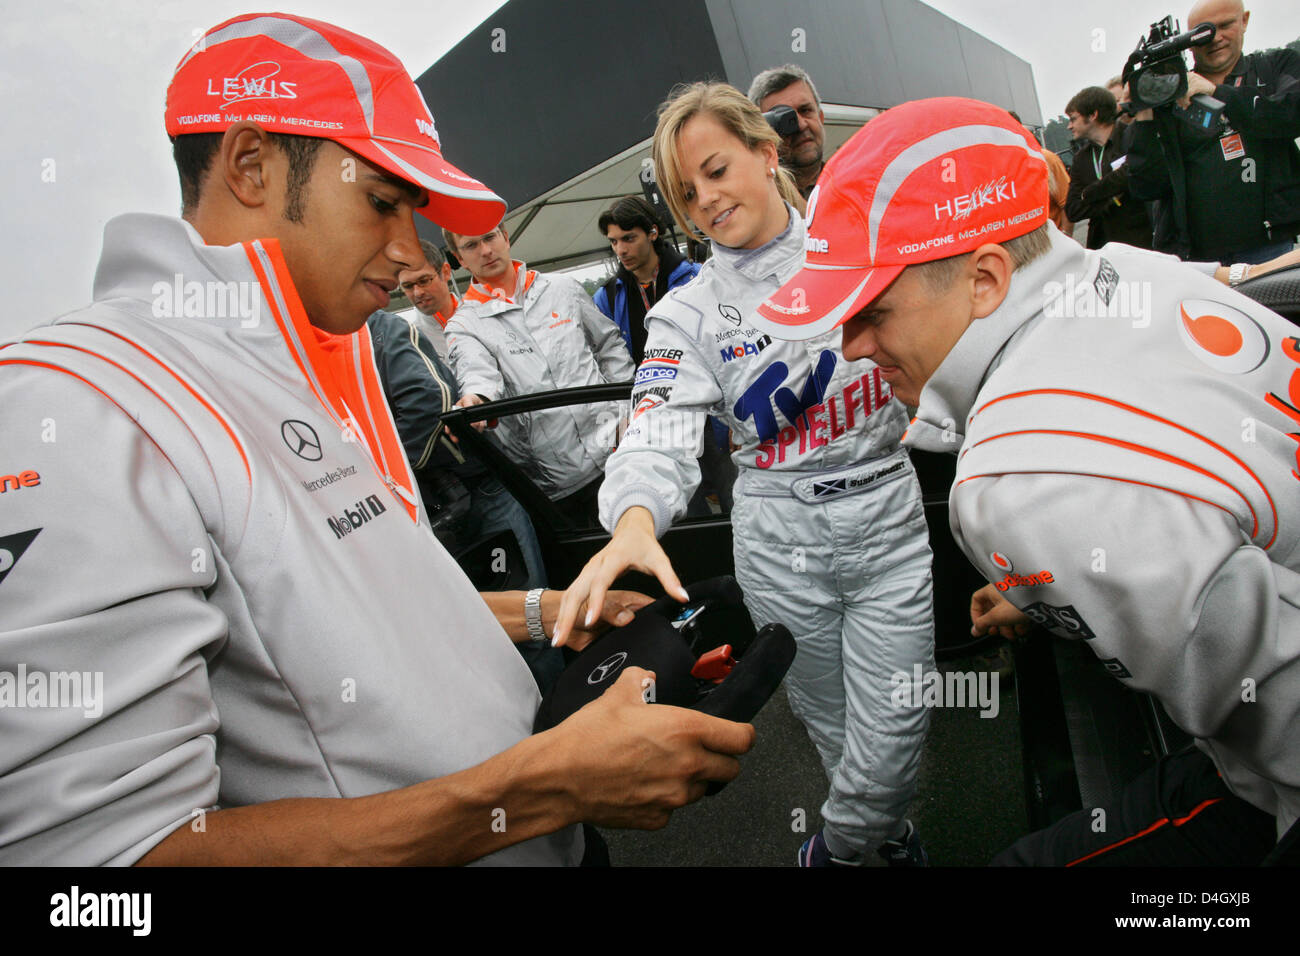 Scottish touring car driver Susie Stoddart (C) chats with British Formula One driver Lewis Hamilton of McLaren Mercedes (L) and teammate Heikki Kovalainen at Hockenheim race track in Germany, 17 July 2008. The German Grand Prix will take place on 20 July 2008. Photo: JENS BUETTNER Stock Photo